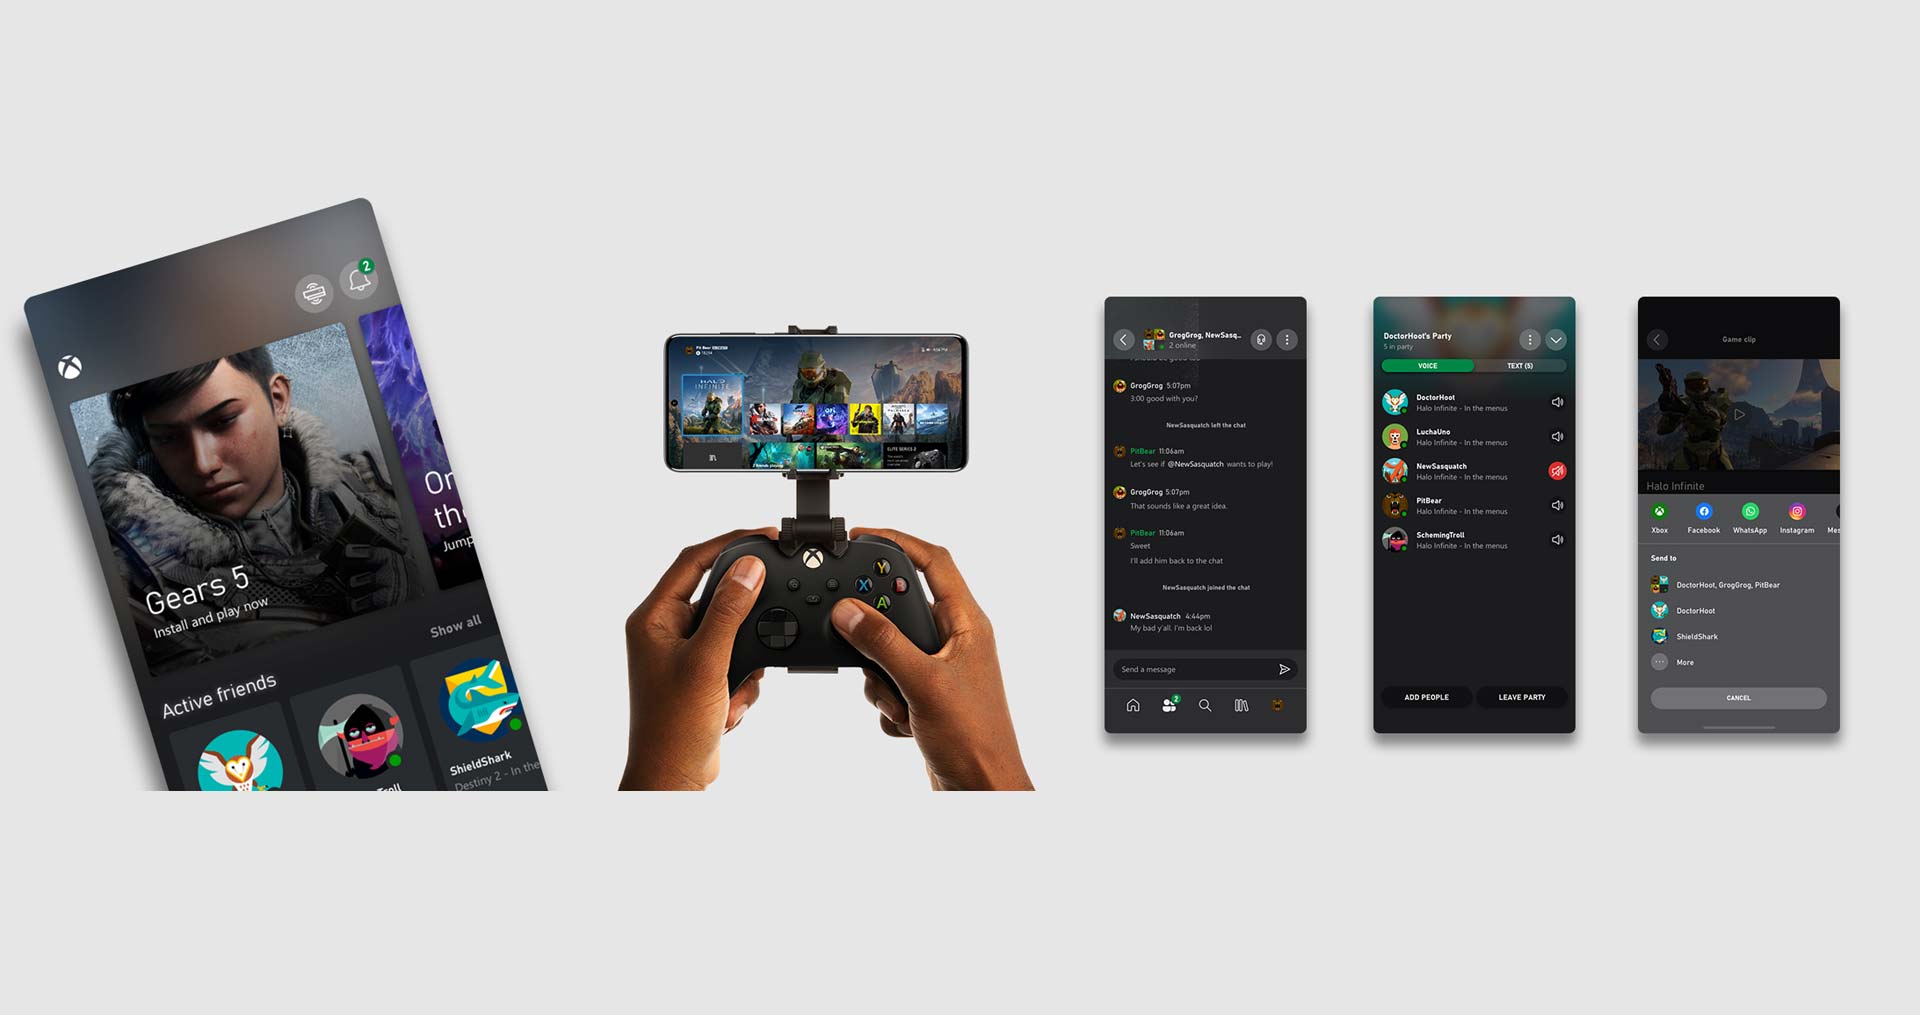 New Xbox Android app lets you stream your Xbox One games to your phone